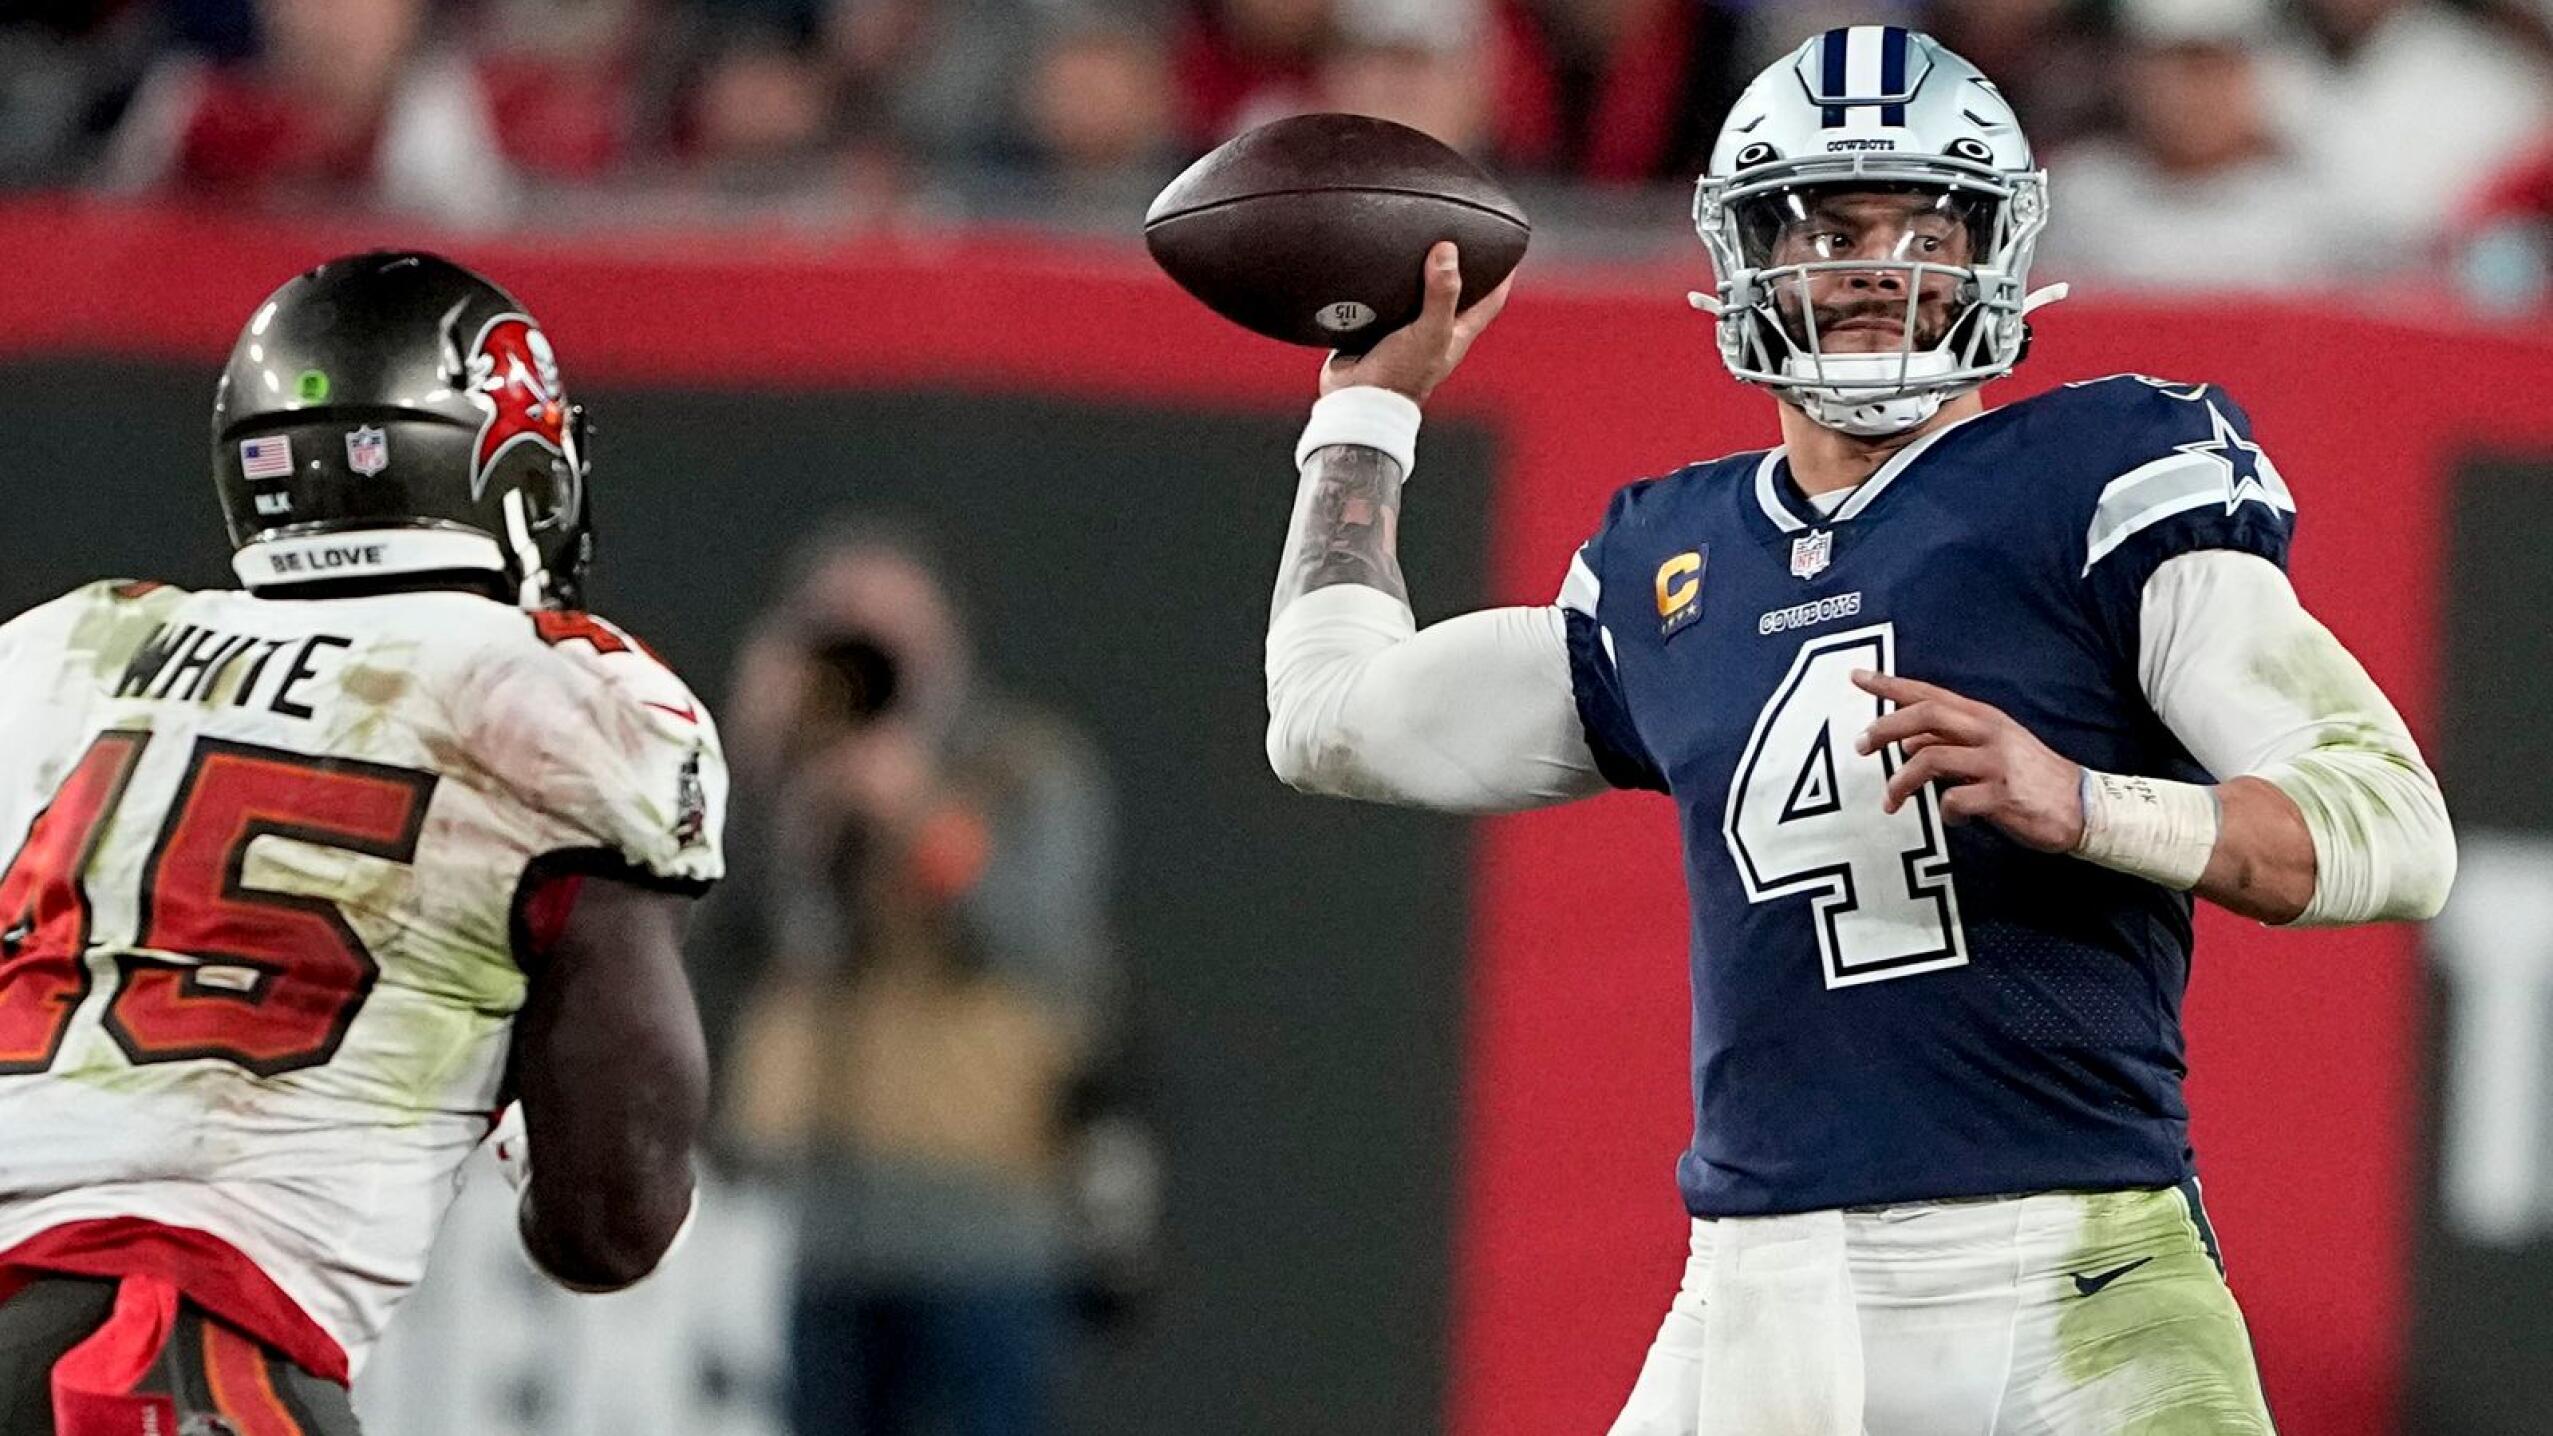 Prescott's playoff answer positions Cowboys to alter history